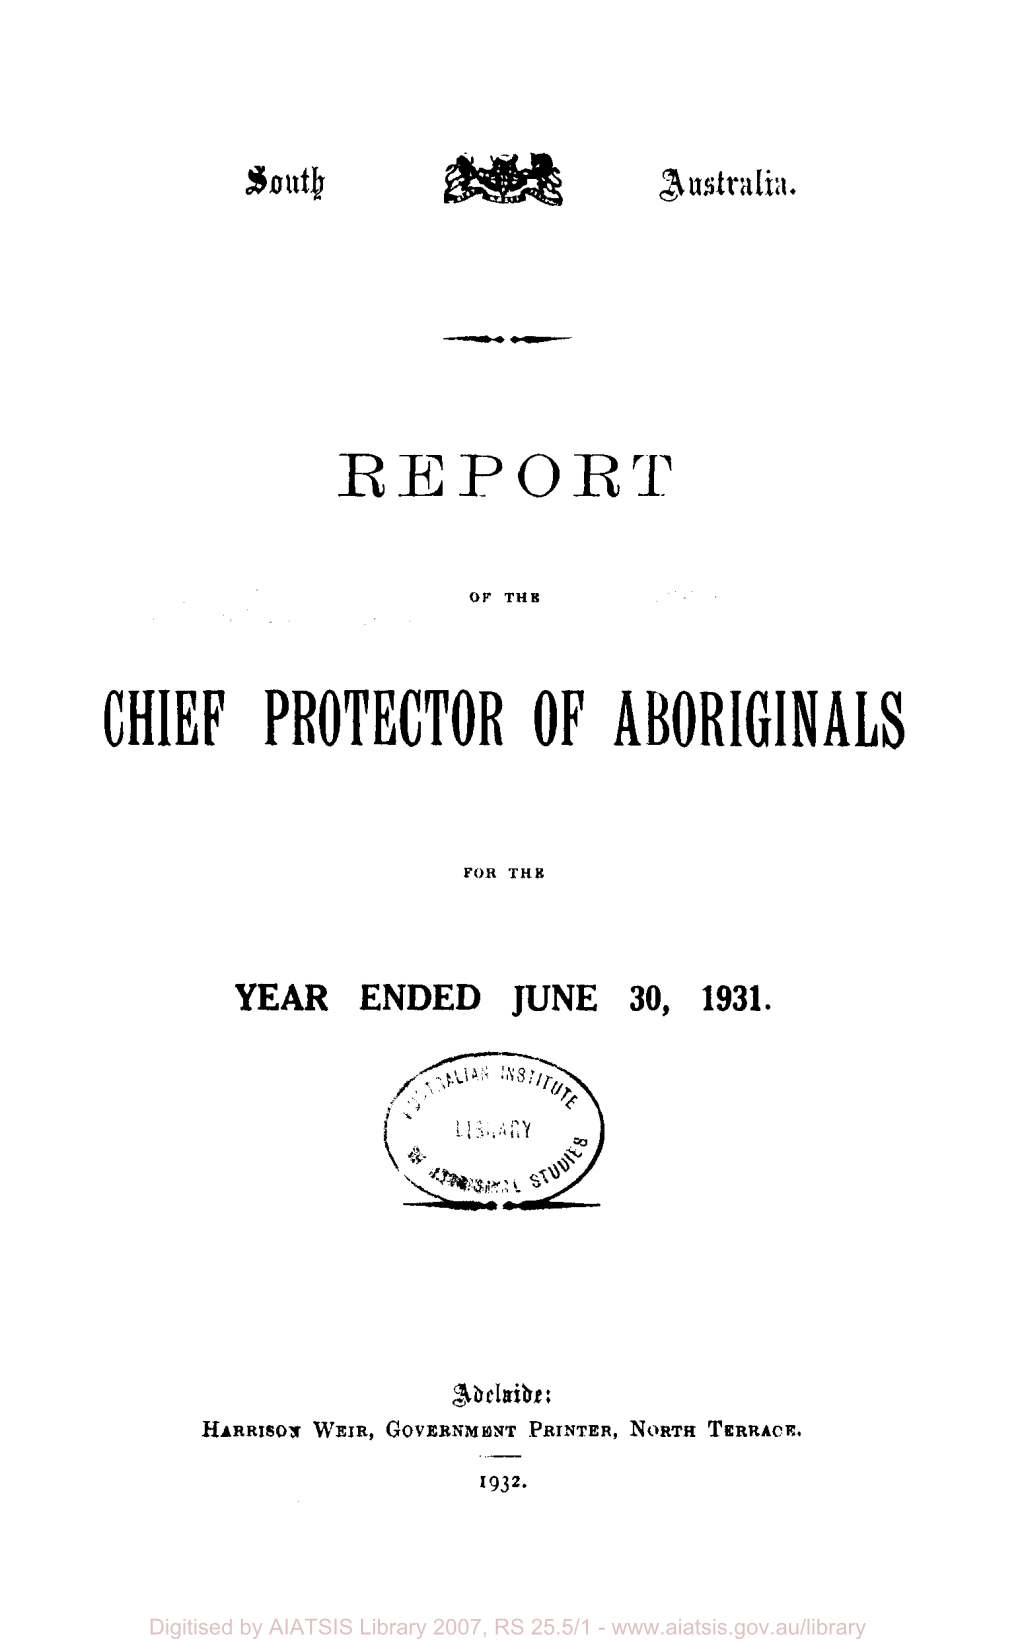 Report of the Chief Protector of Aboriginals, for the Year Ended